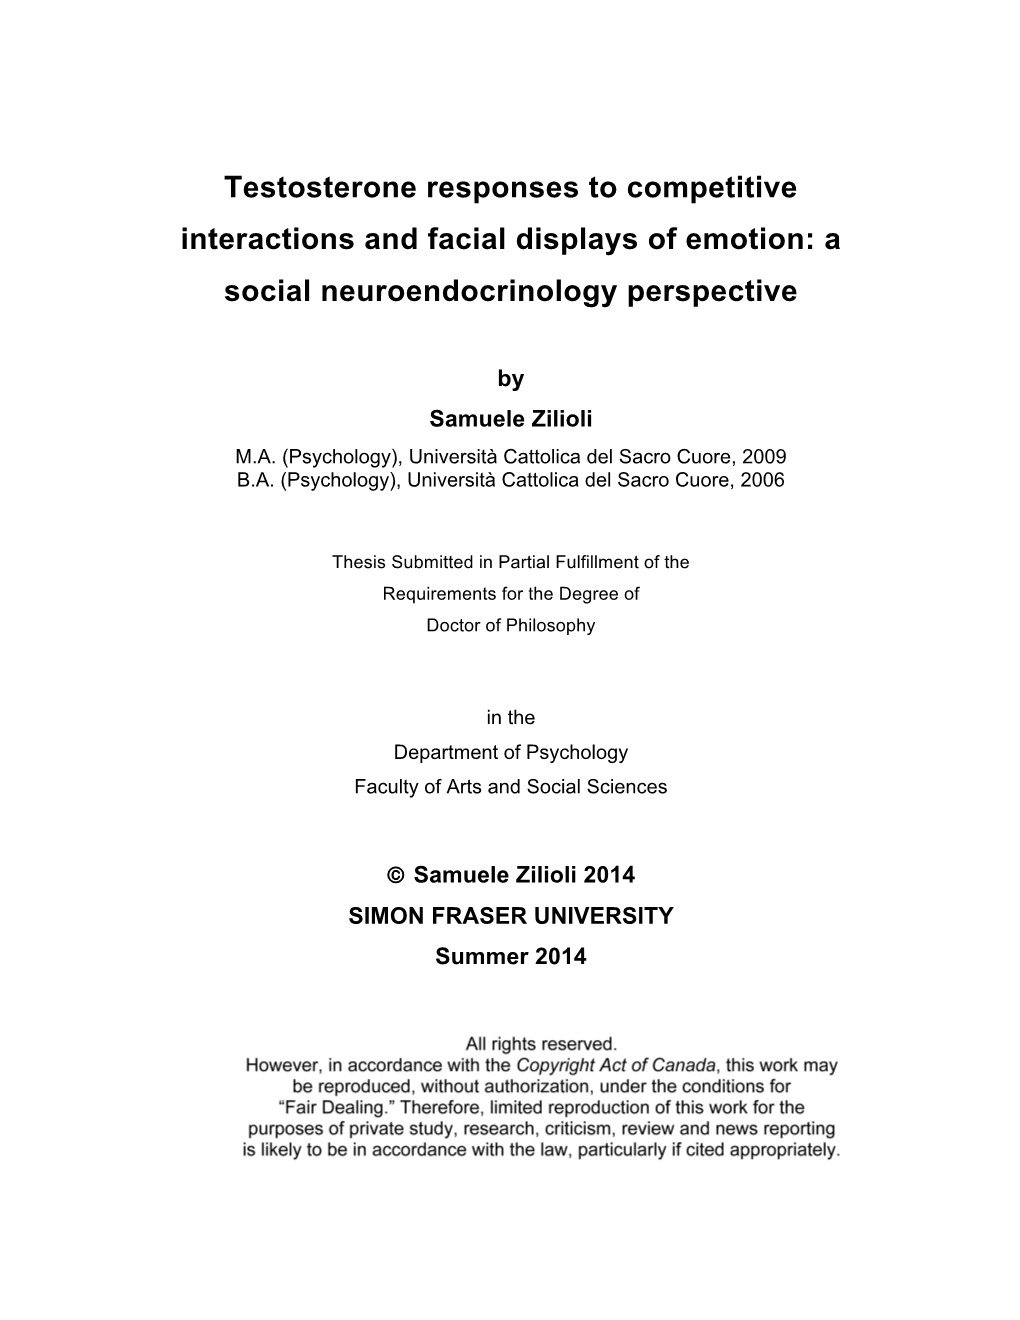 Testosterone Responses to Competitive Interactions and Facial Displays of Emotion: a Social Neuroendocrinology Perspective